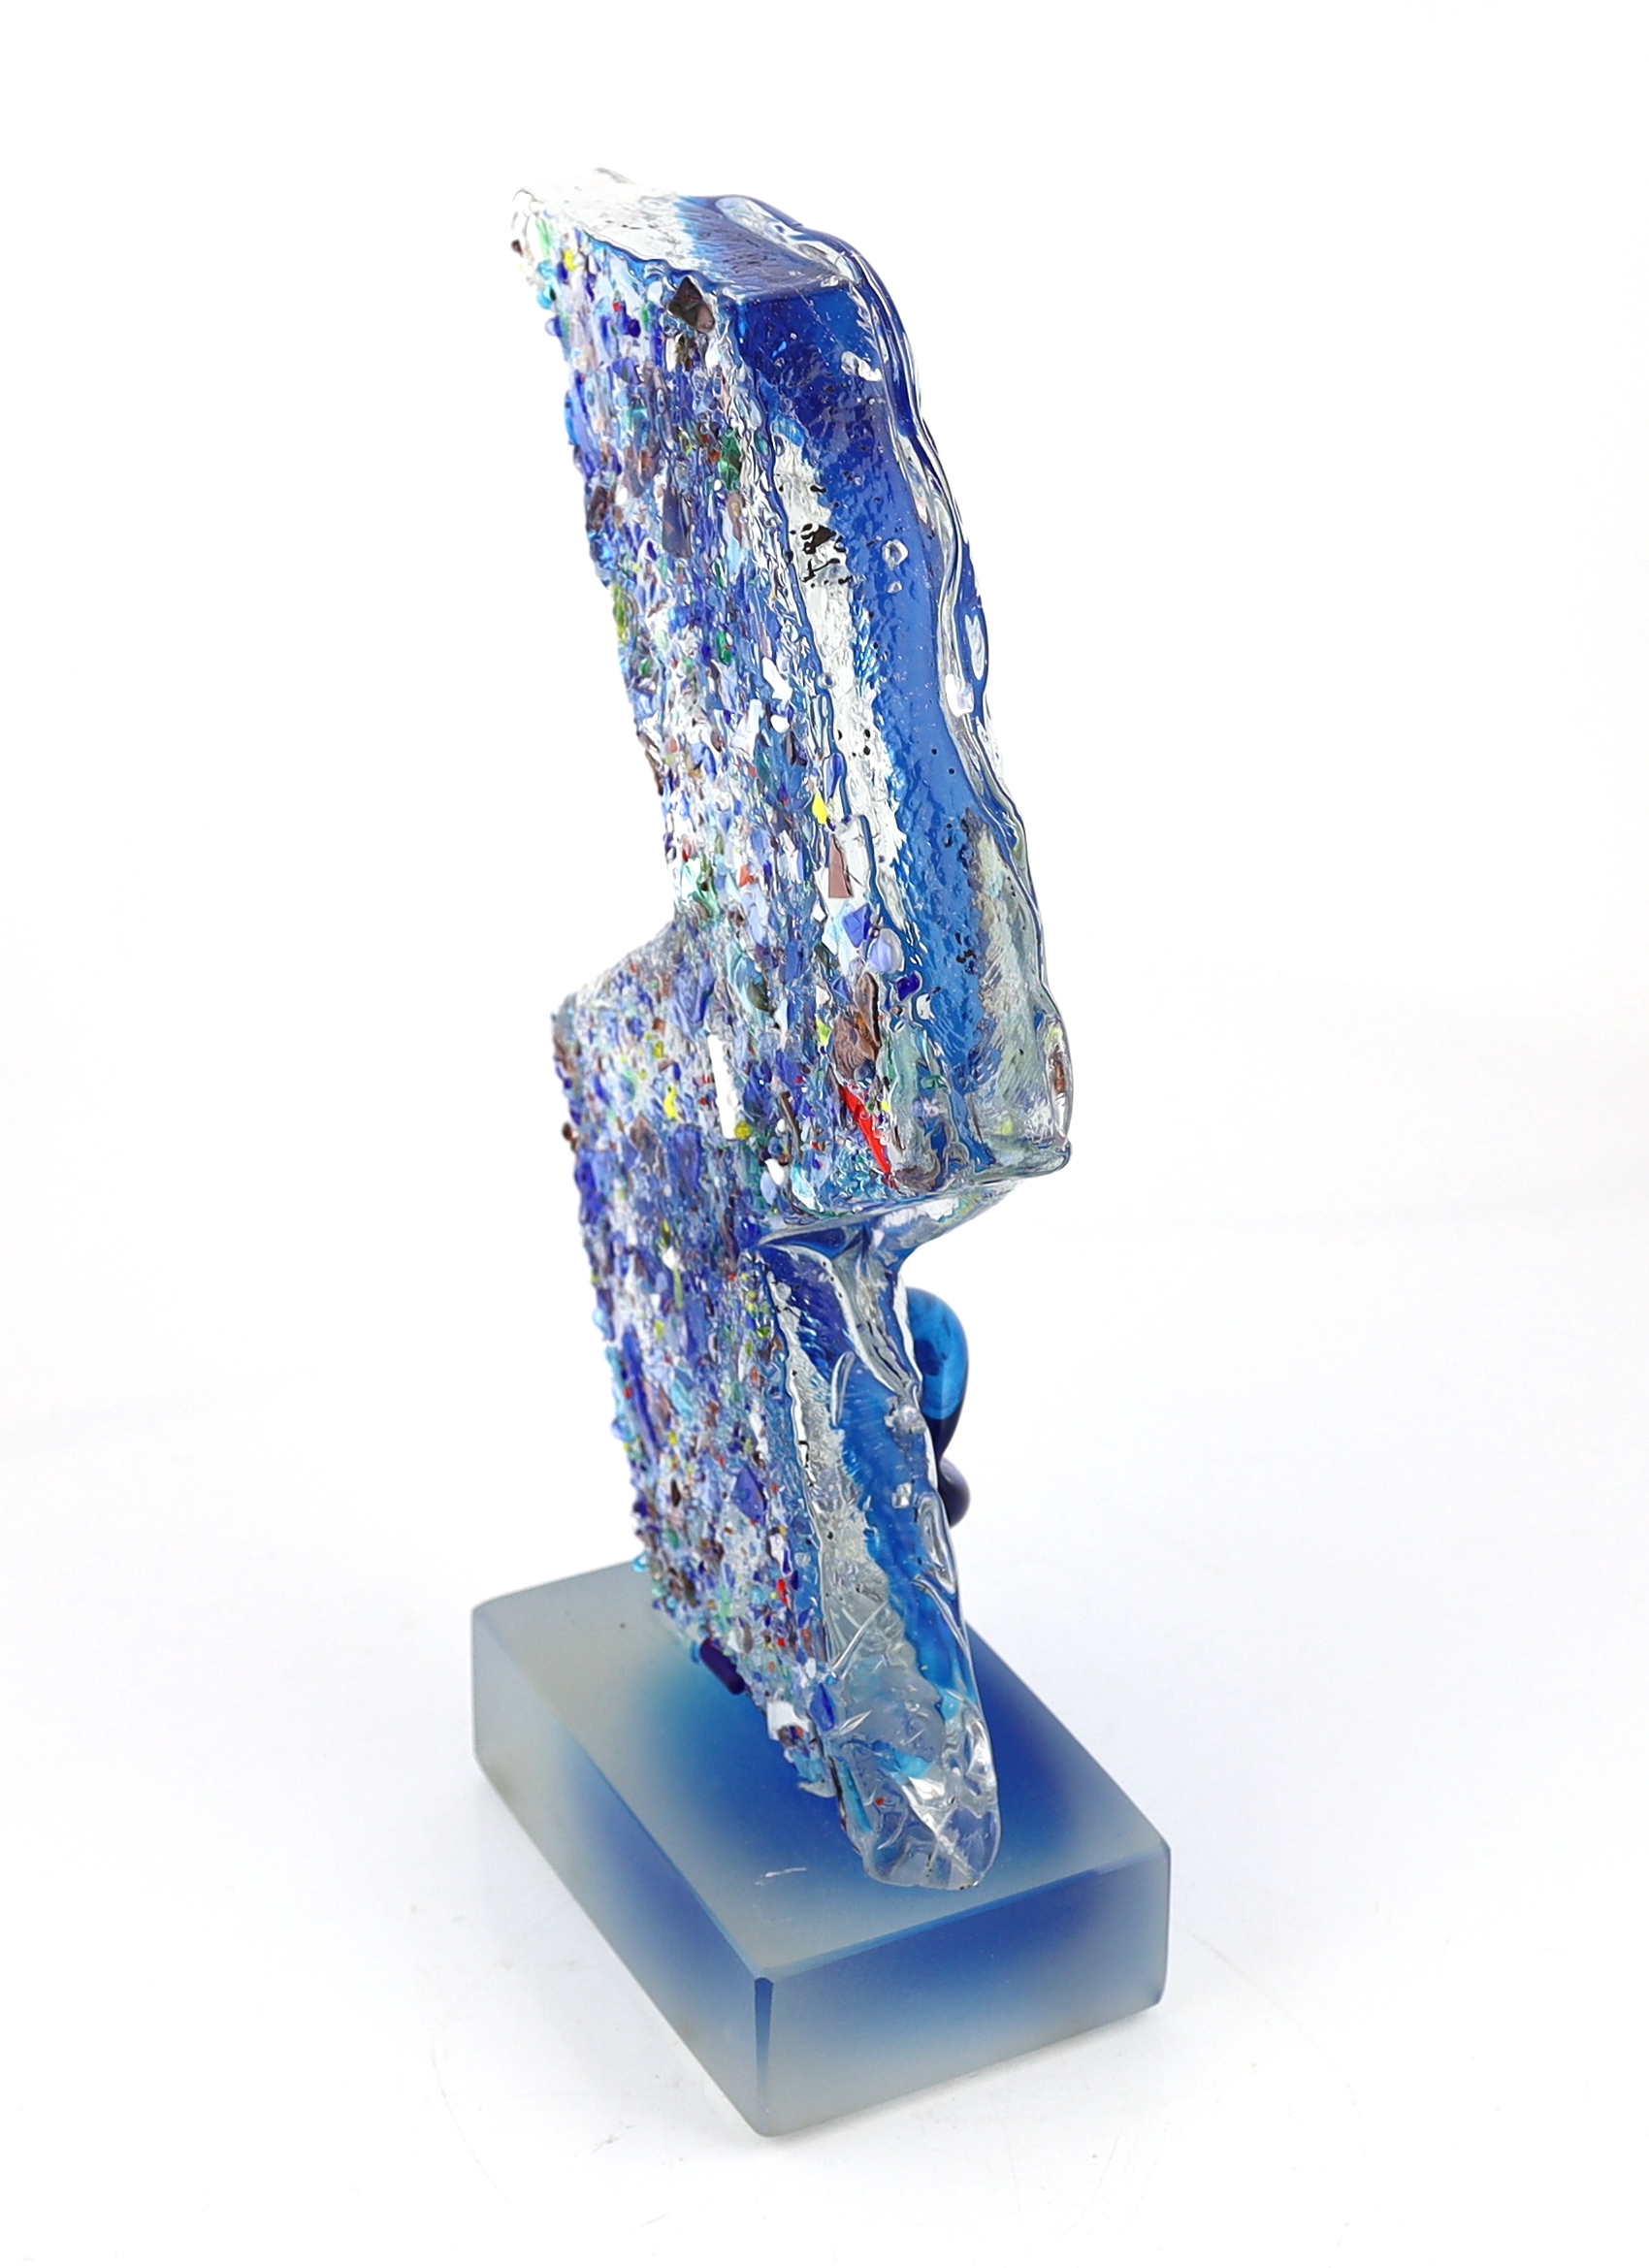 A Murano glass abstract model of a leaping fish